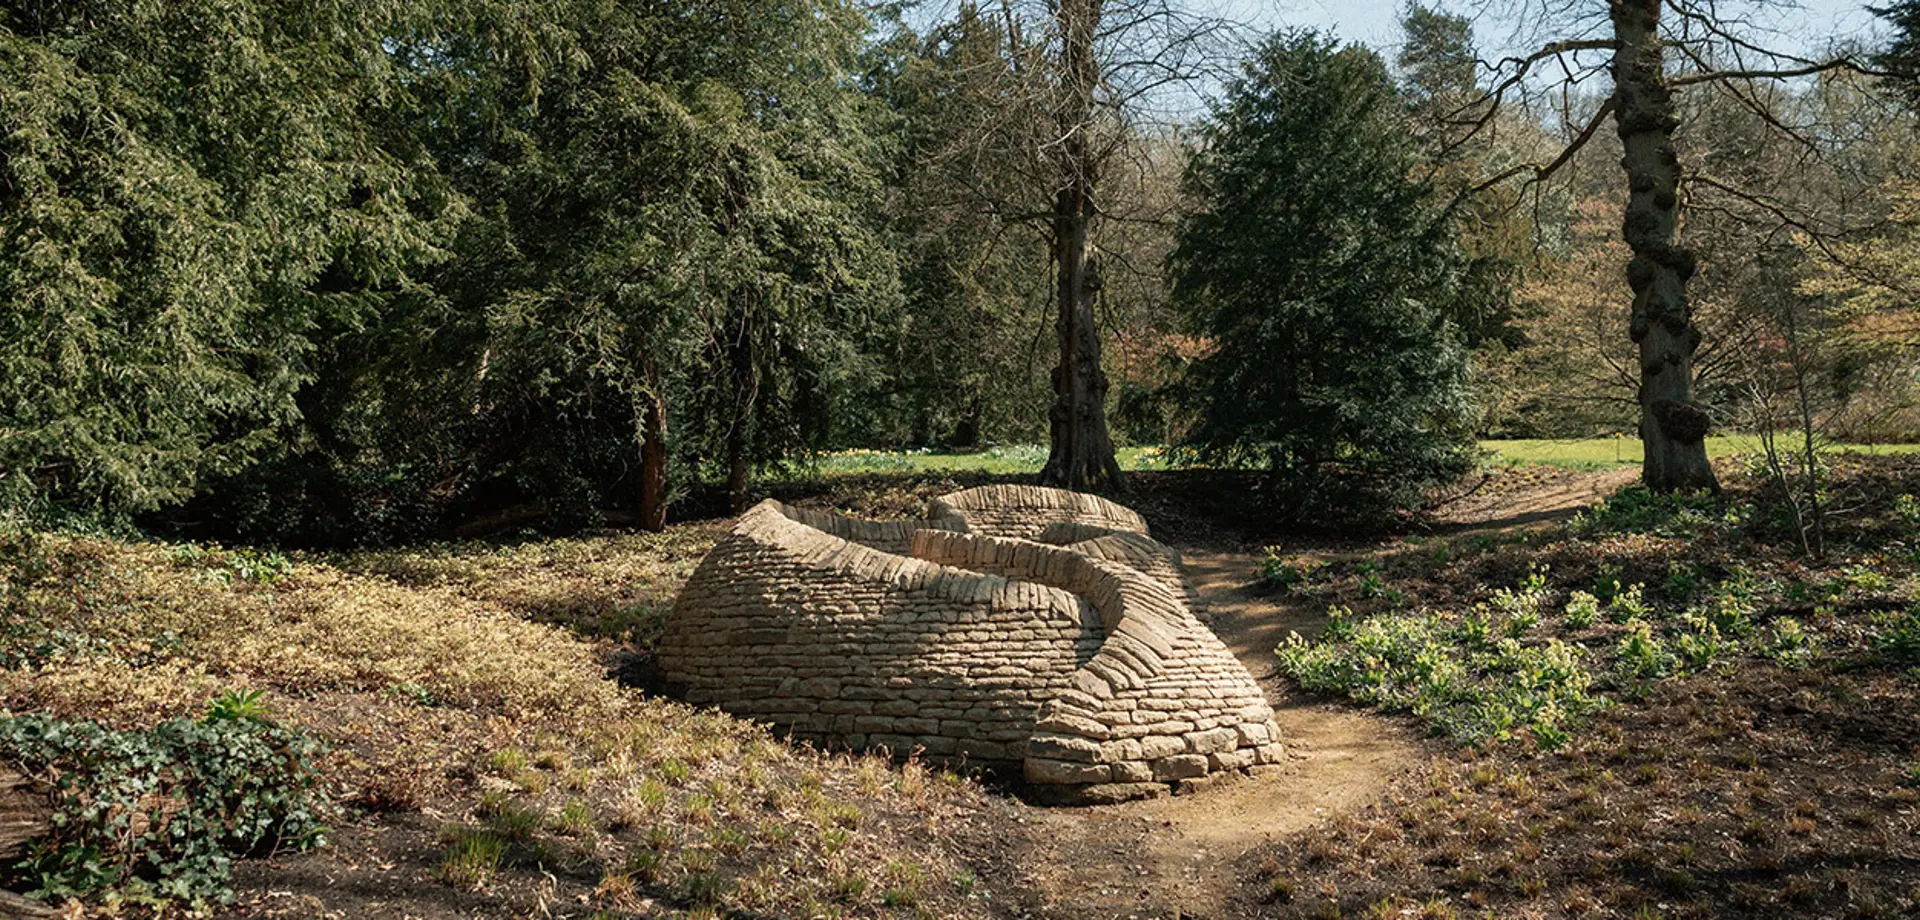 Chatsworth’s Arcadia takes Natural Course for a monumental sculptural centrepiece